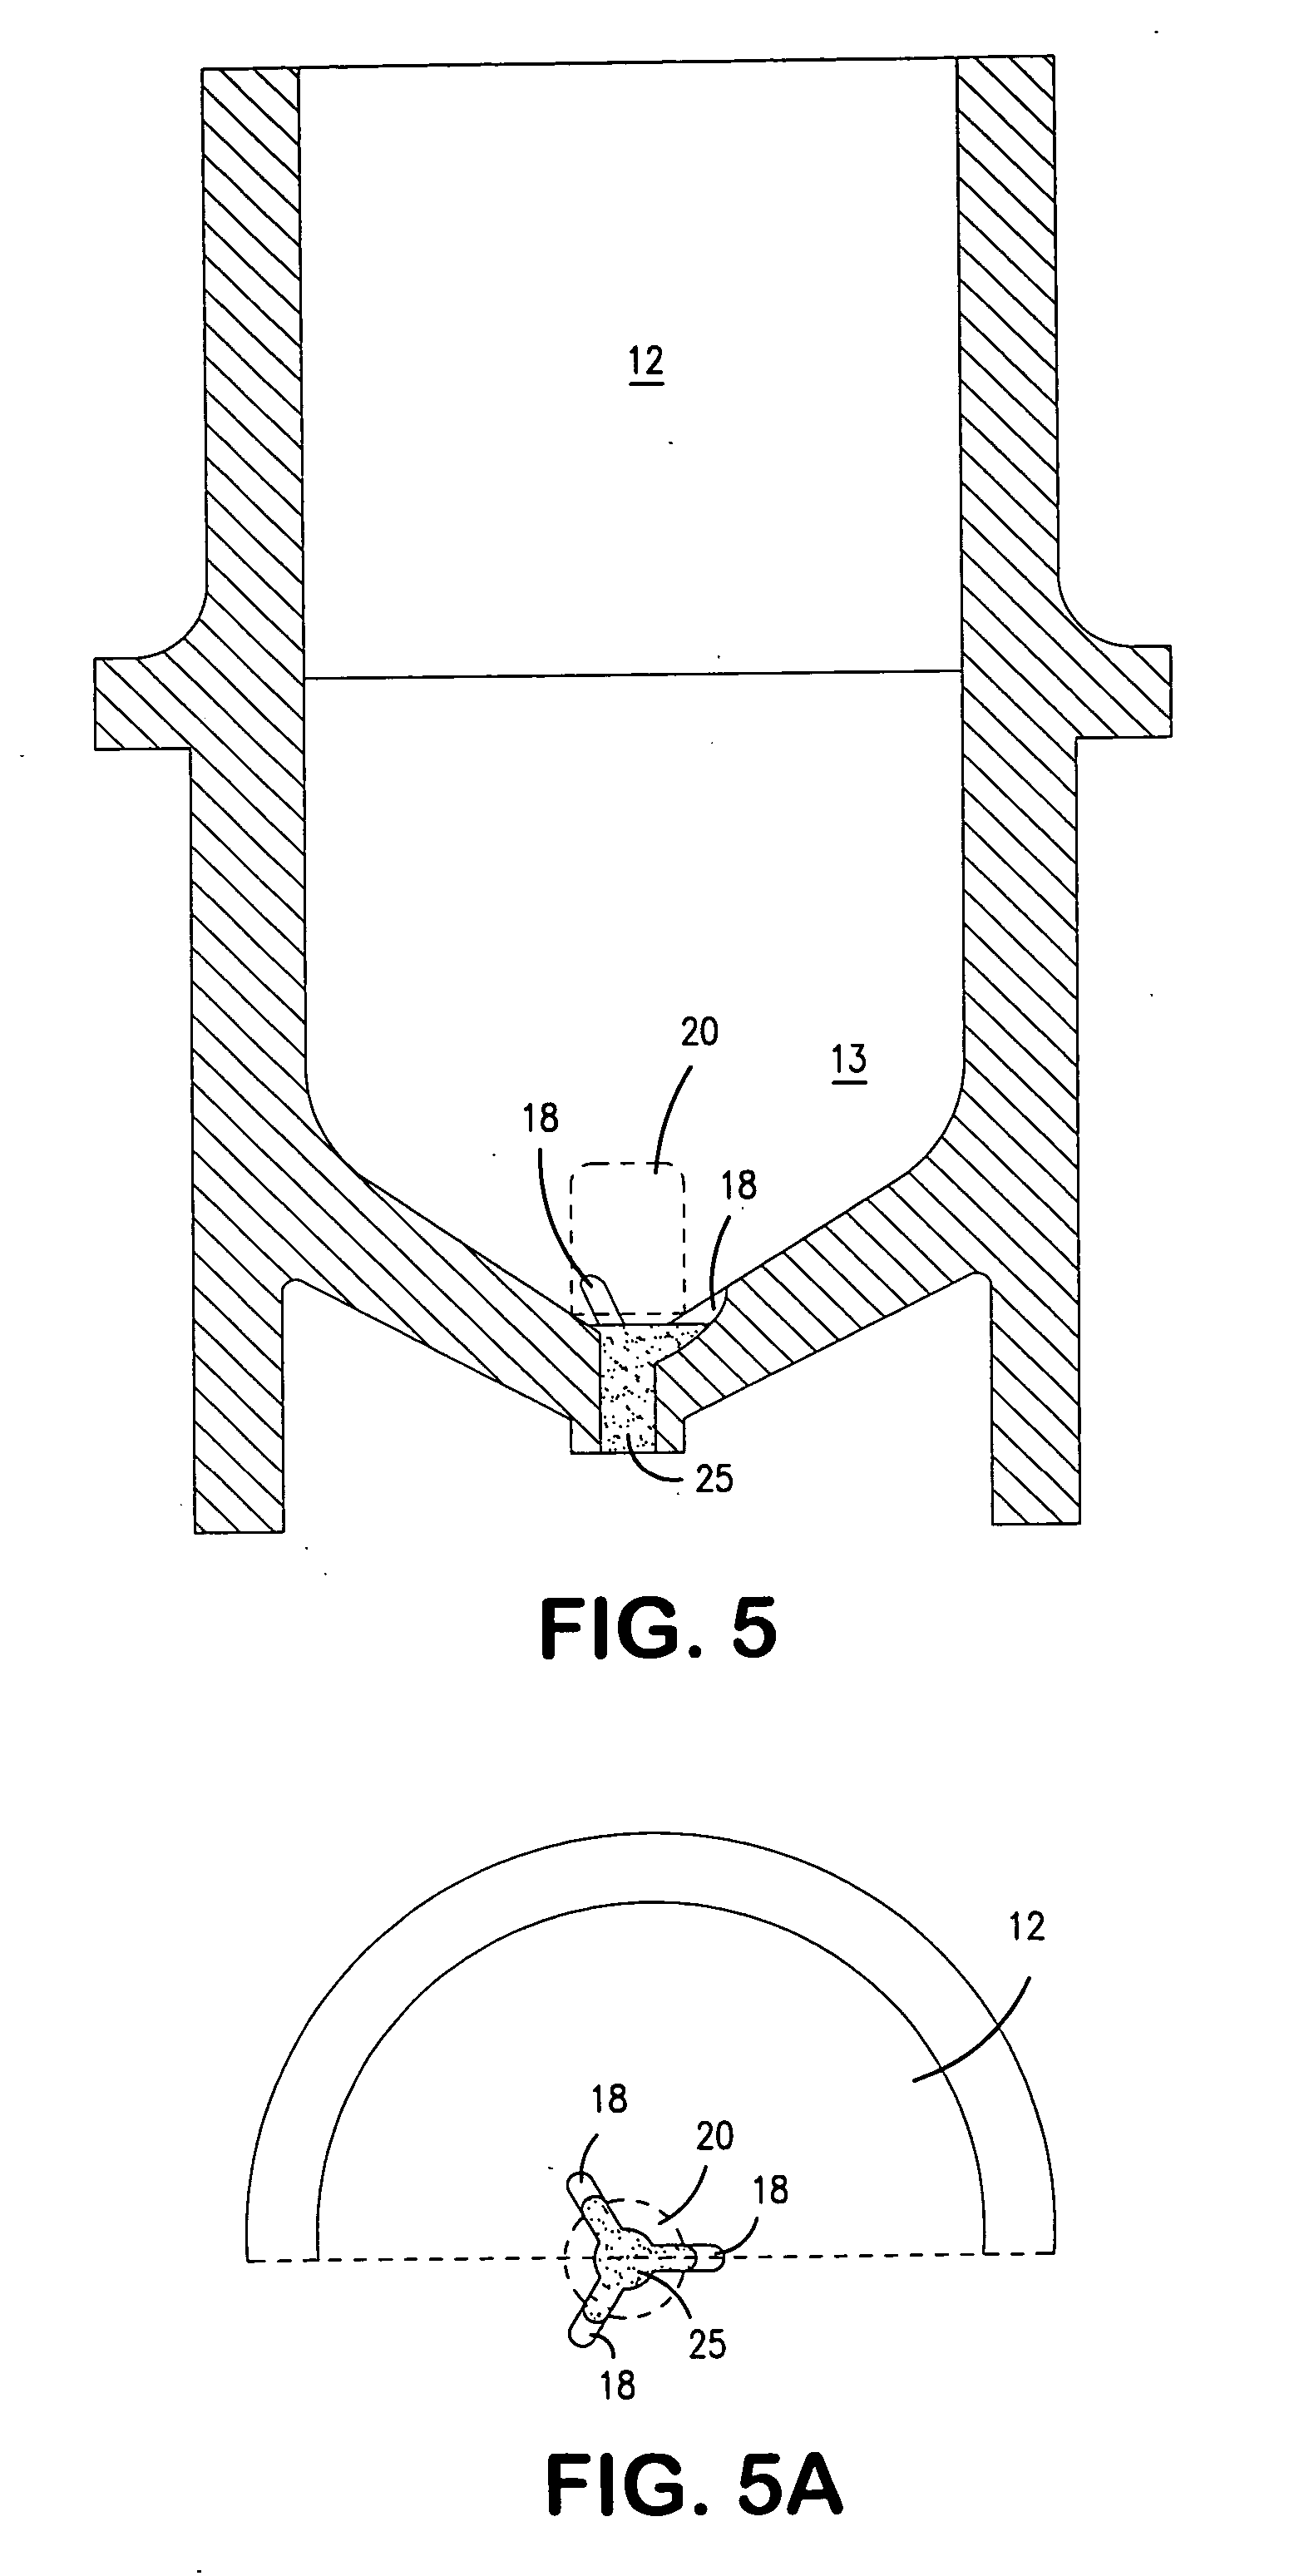 Anti-clogging device and method for in-gel digestion applications